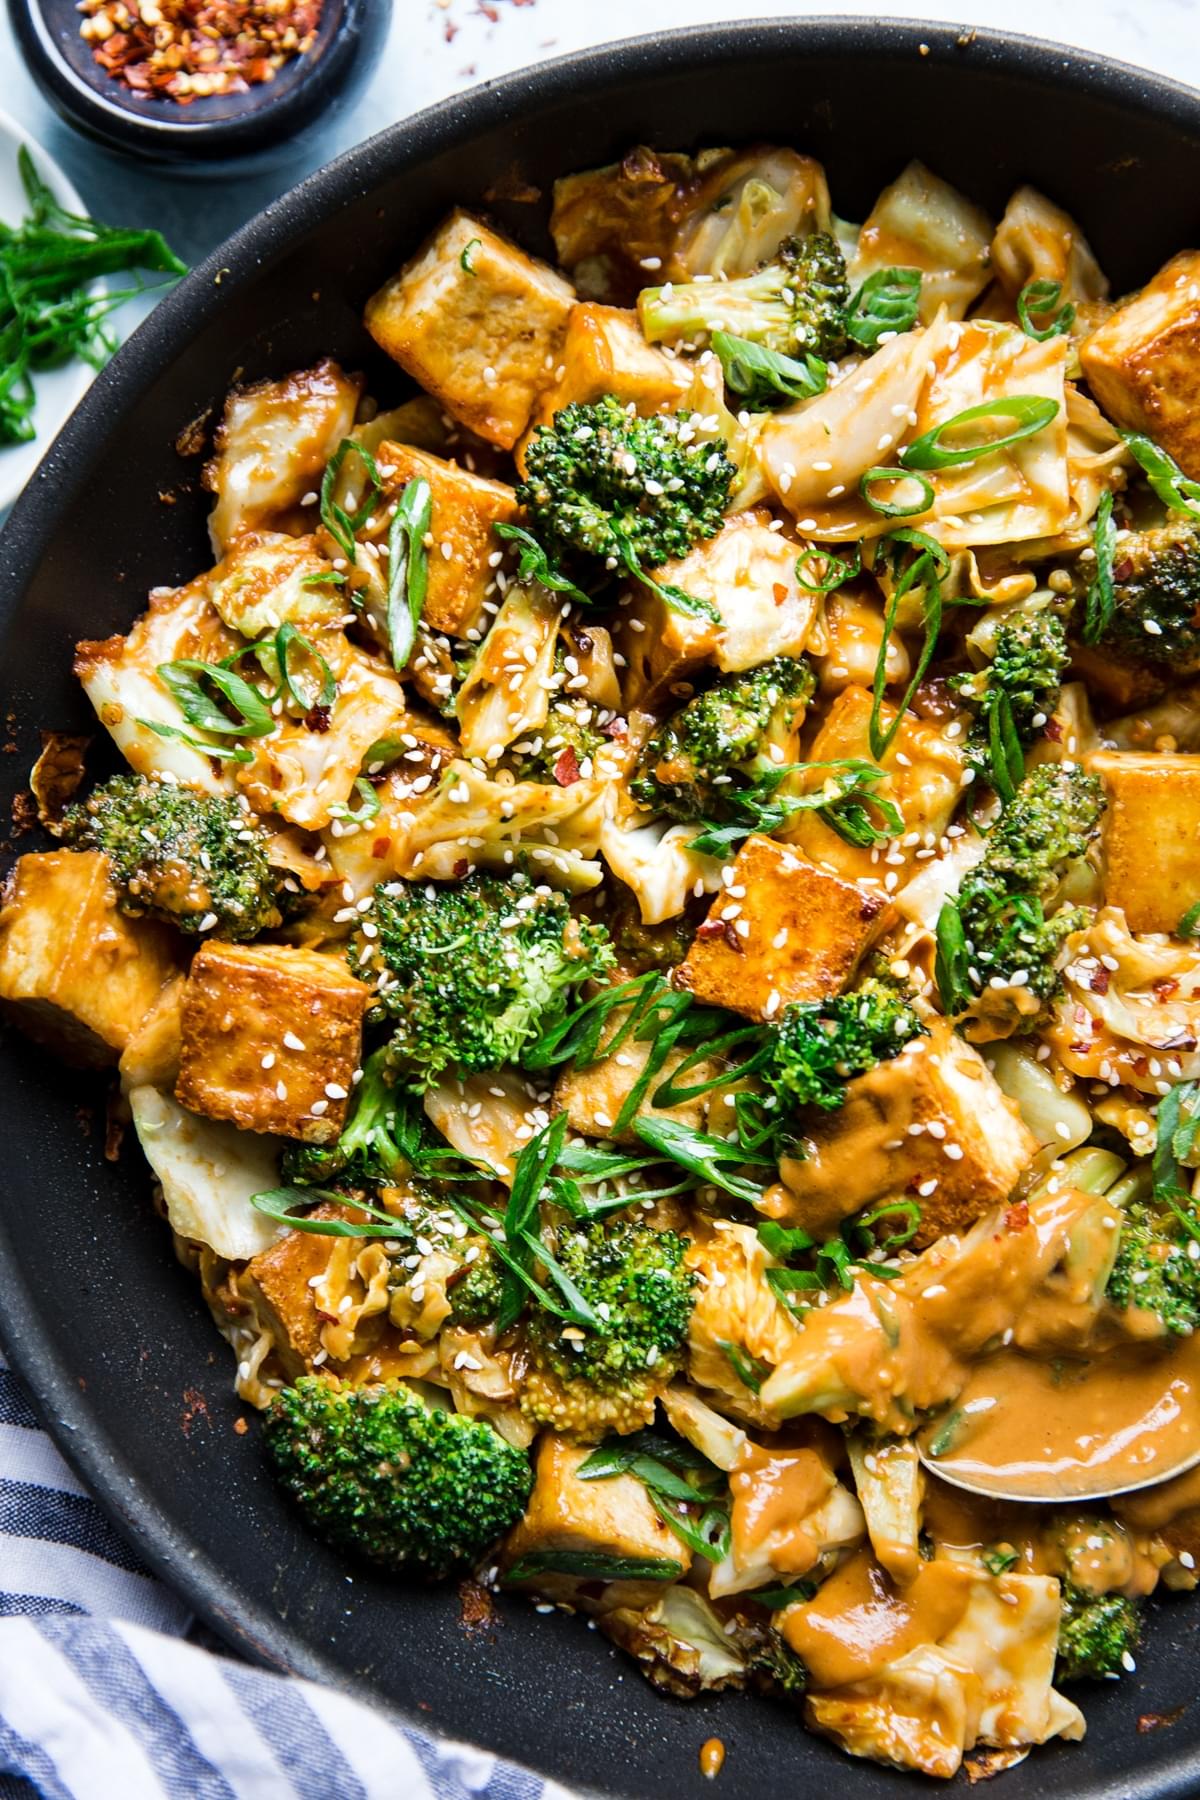 Tofu Stir Fry With Broccoli, Cabbage and peanut sauce in a pan with serving spoon.